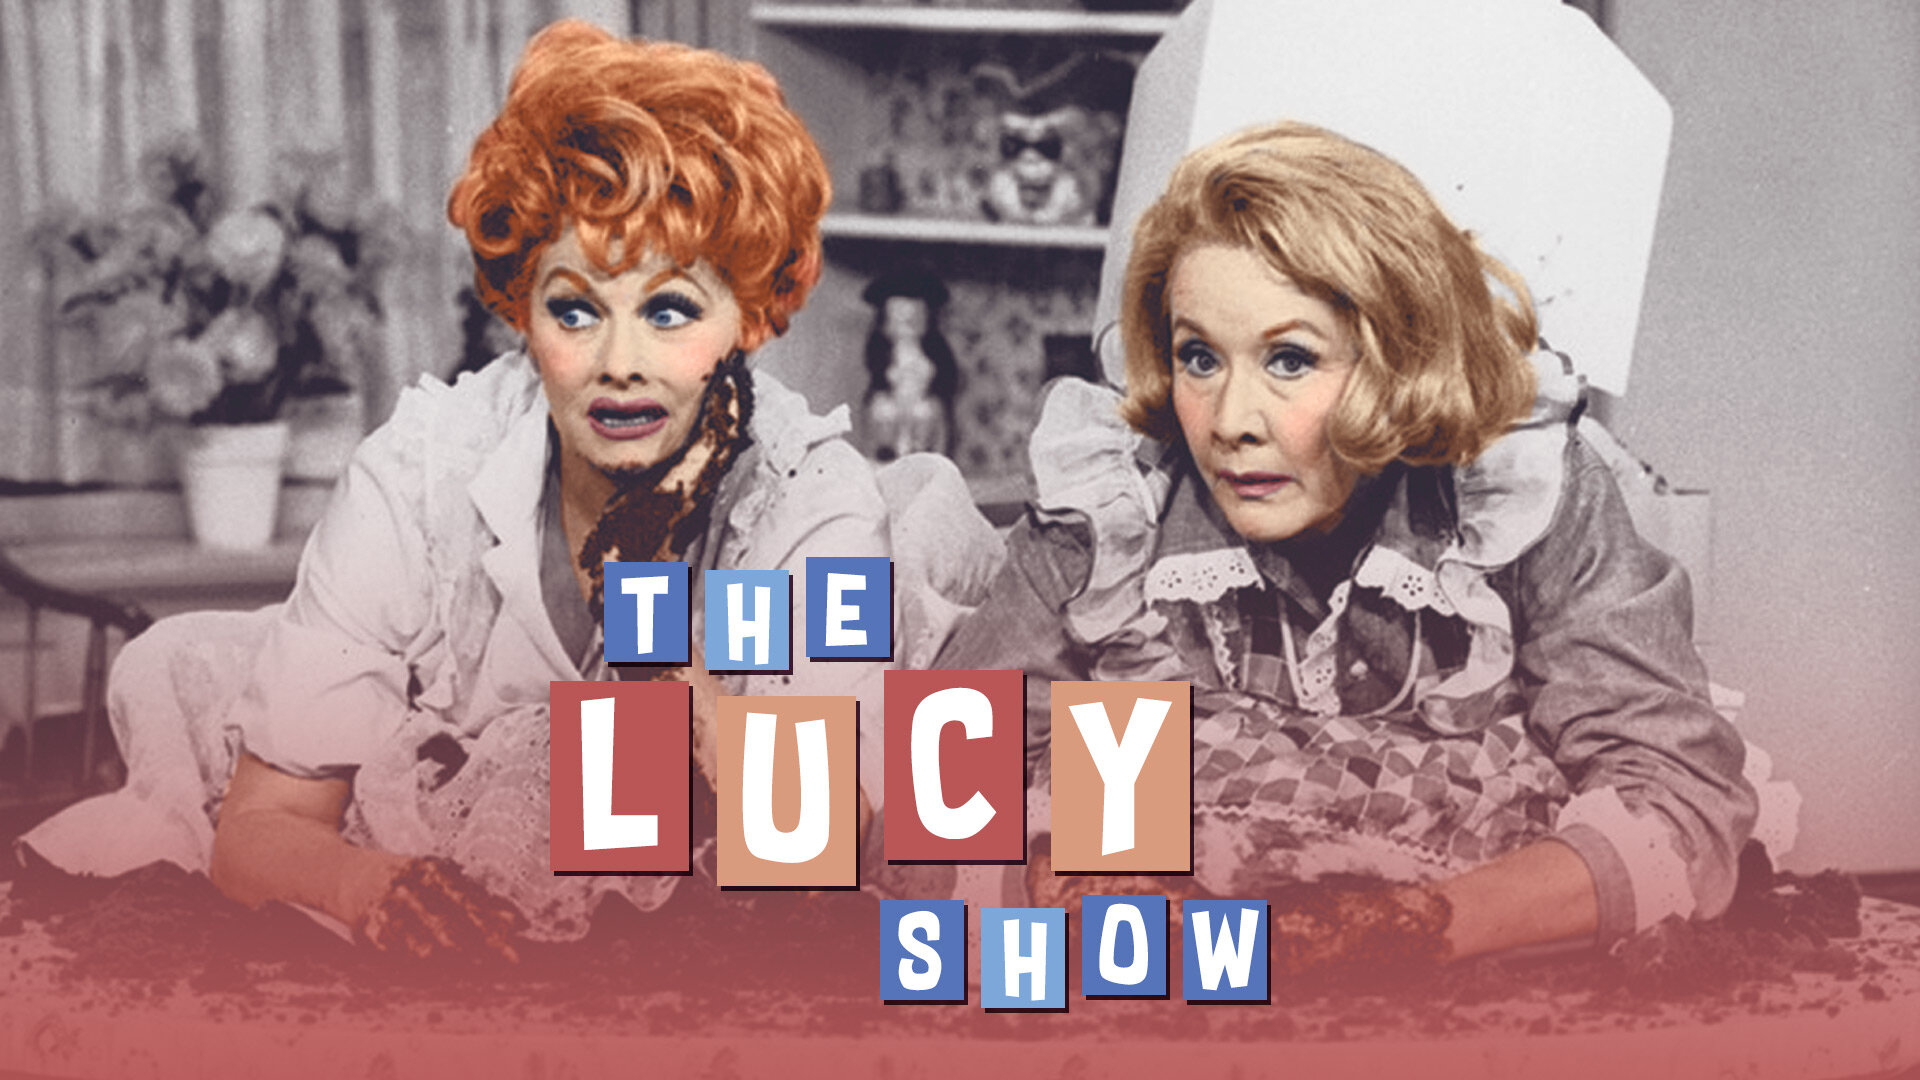 5153 - The Lucy Show_1920x1080.jpg